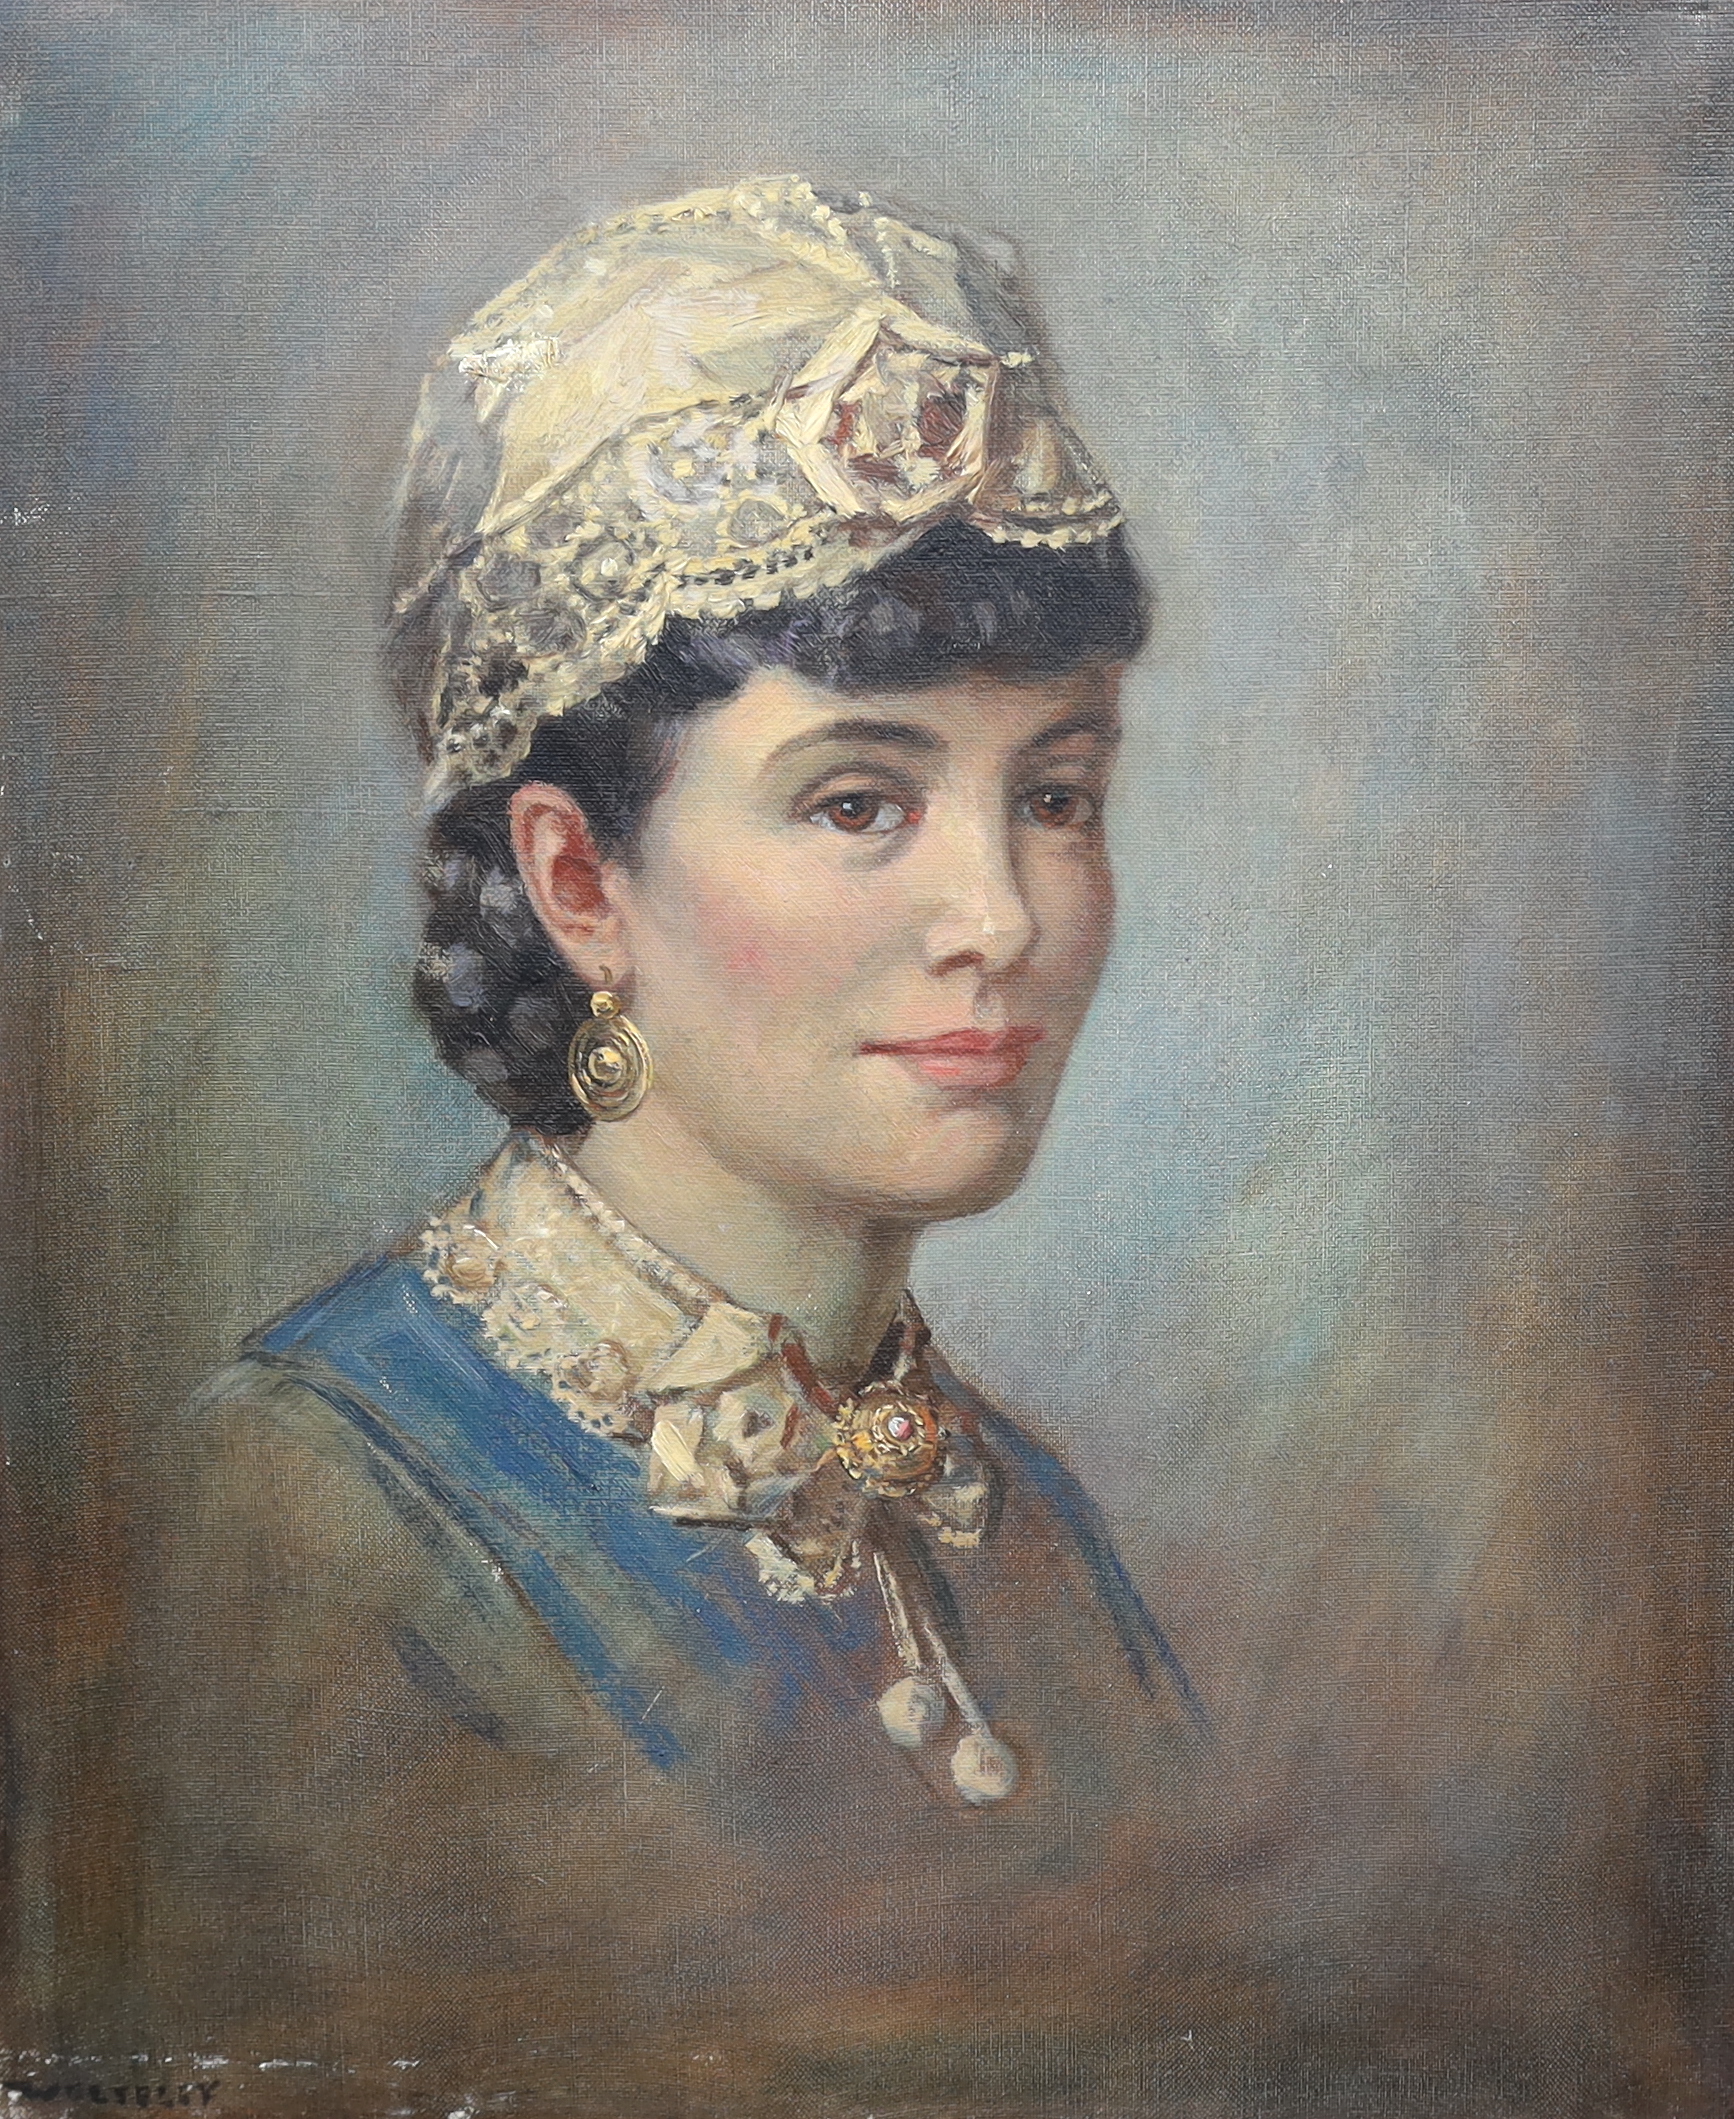 Garnet Ruskin Wolseley (English, 1884-1967), oil on canvas, Portrait of a lady wearing a lace cap, signed, 59 x 48cm. Condition - fair, other than damage to canvas to the cap